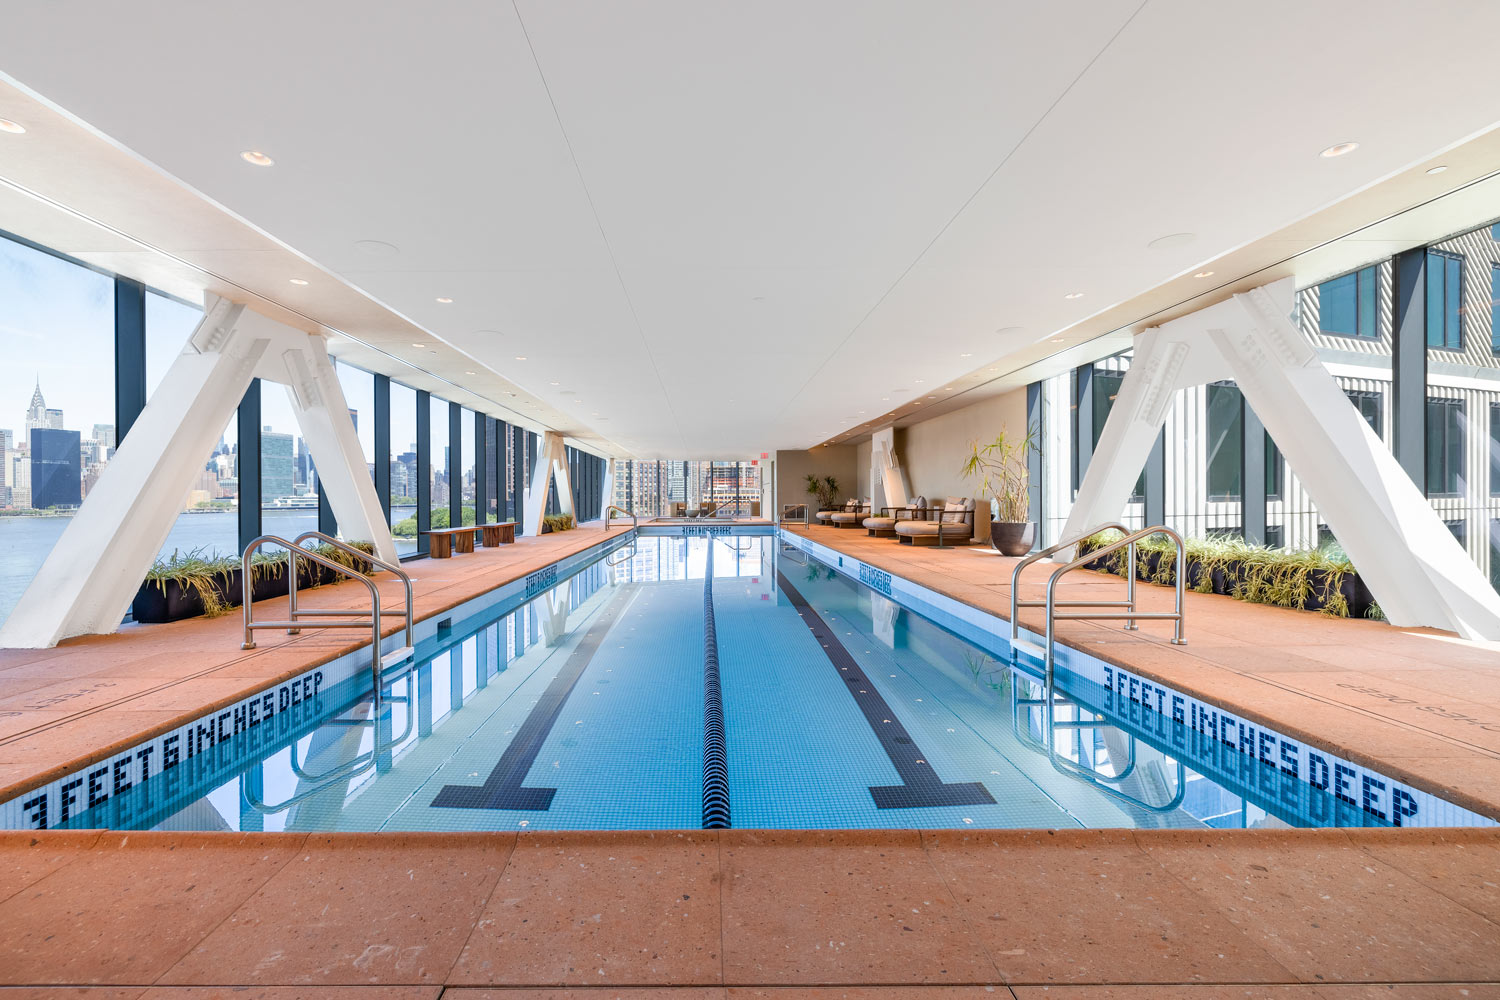 Swim year-round in an indoor lap pool overlooking the city.